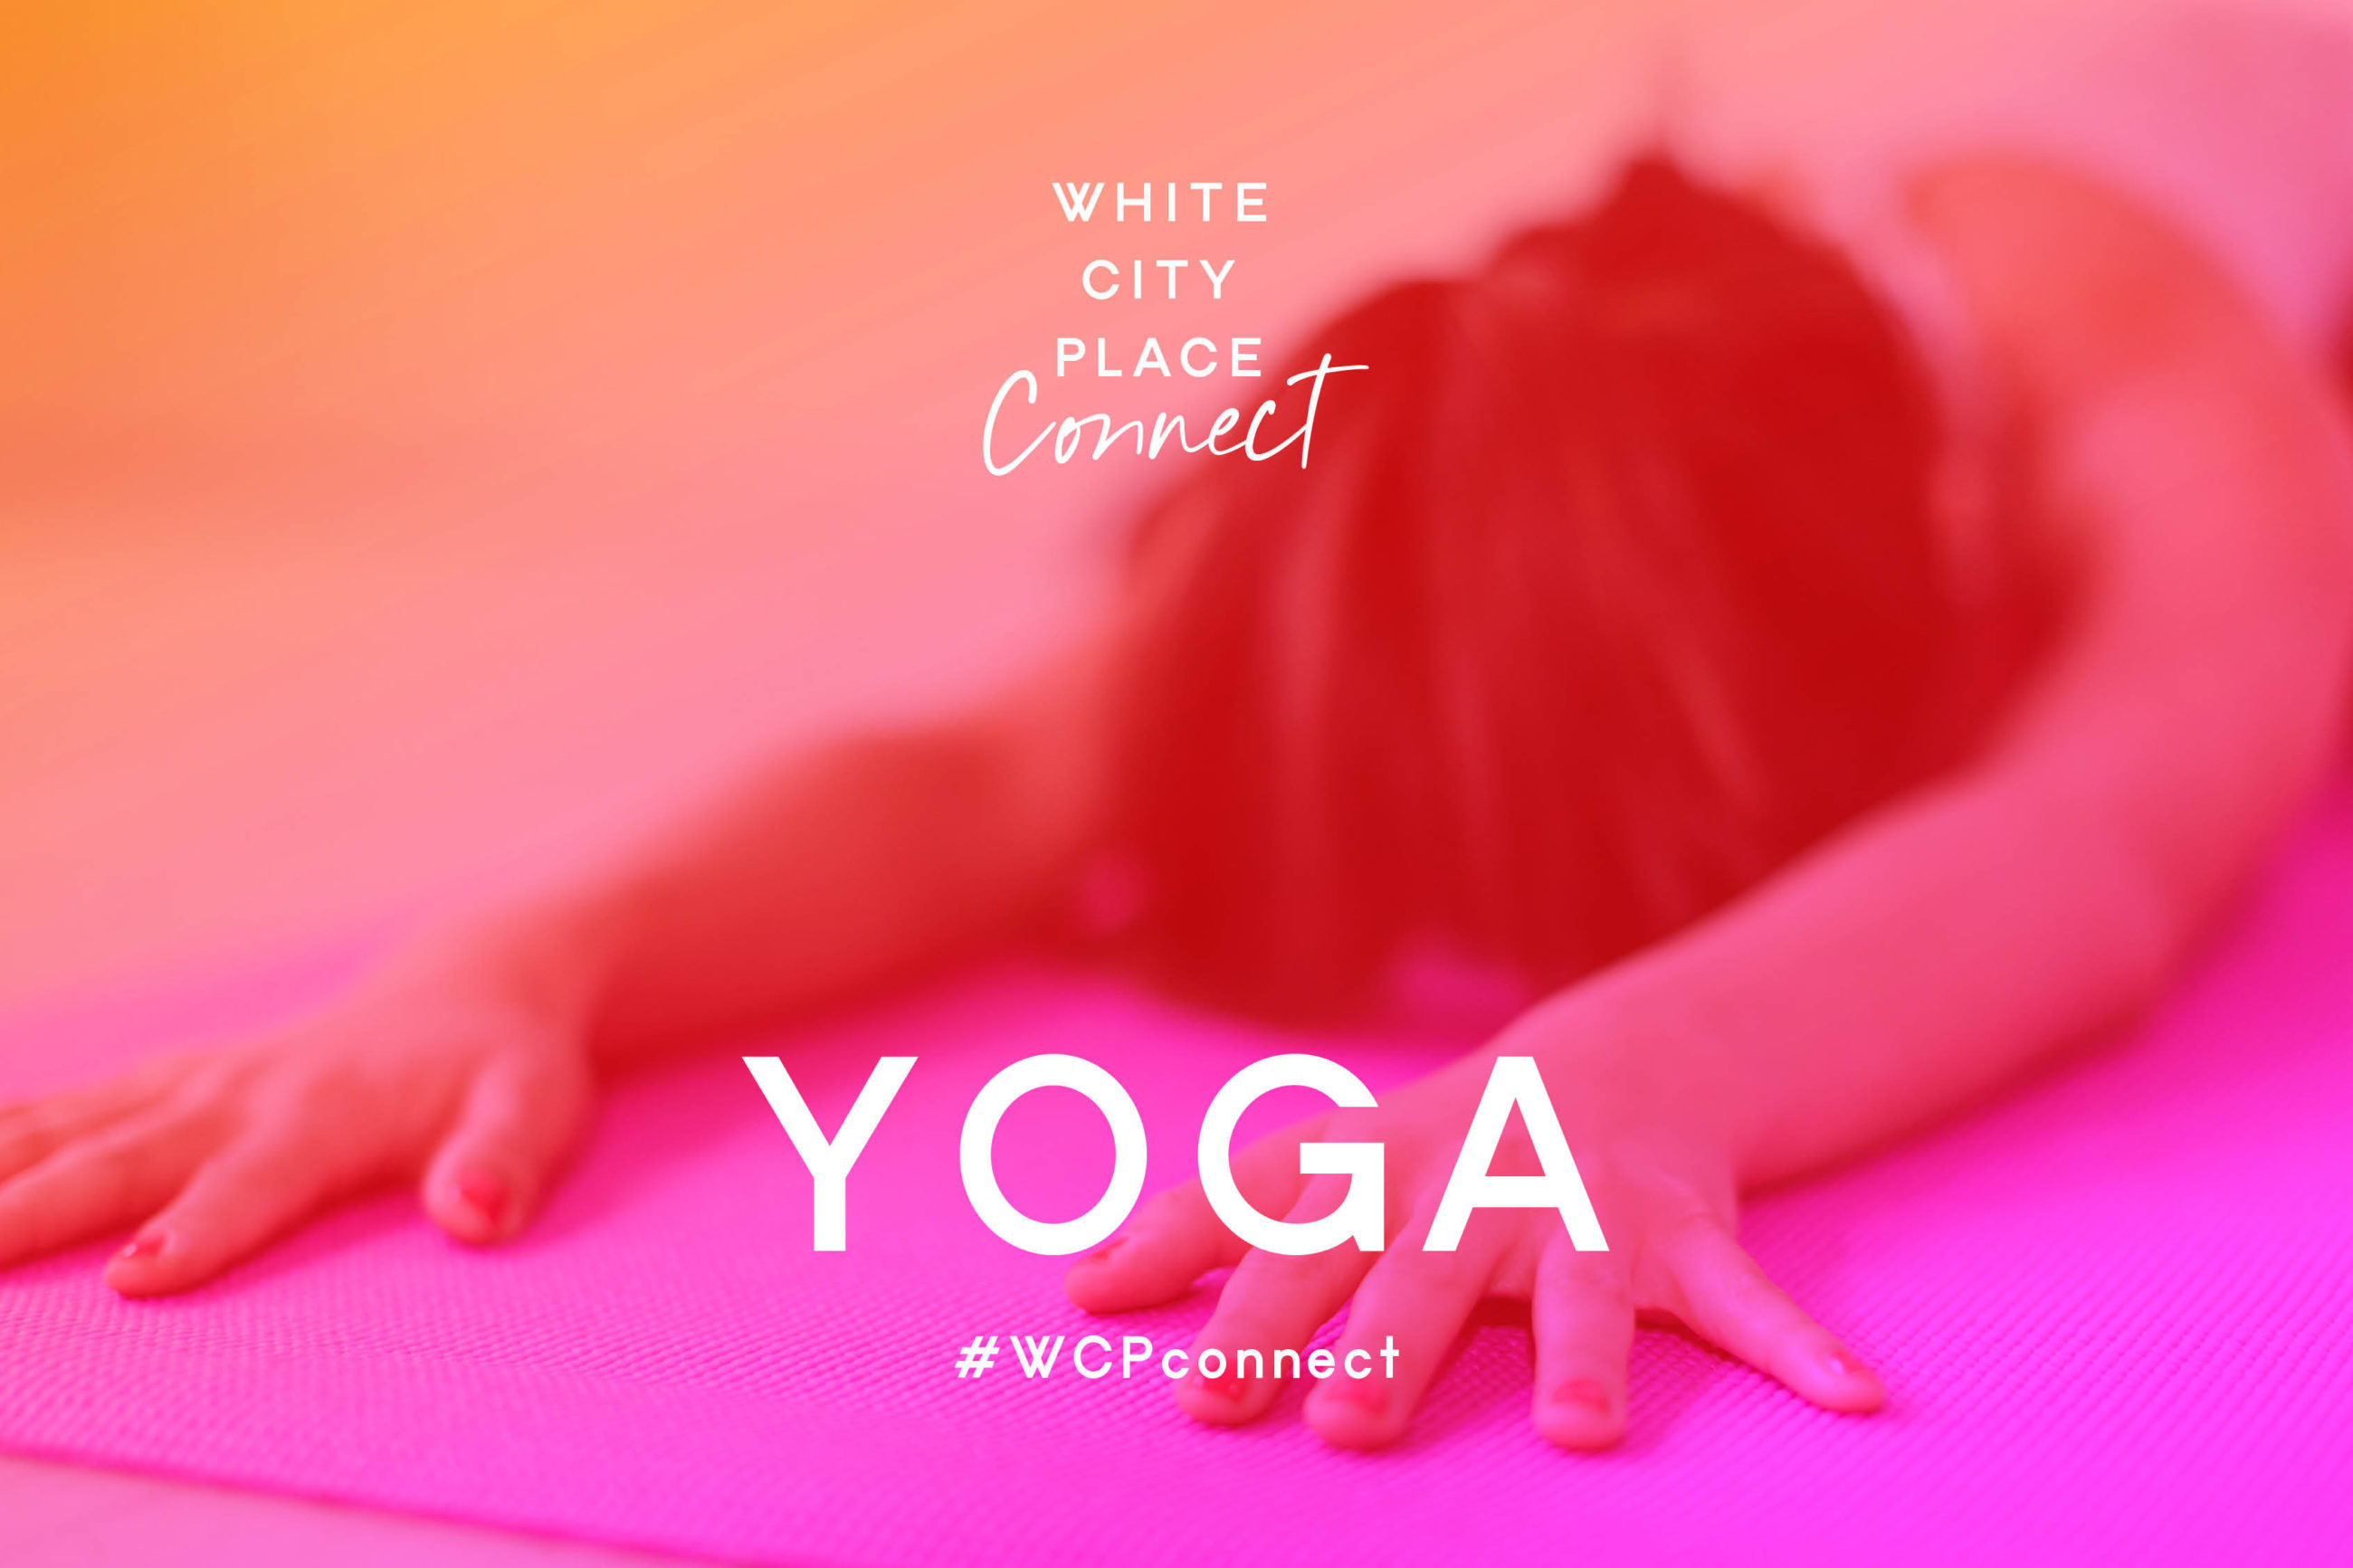 White City Place Connect: Yoga Feature Image